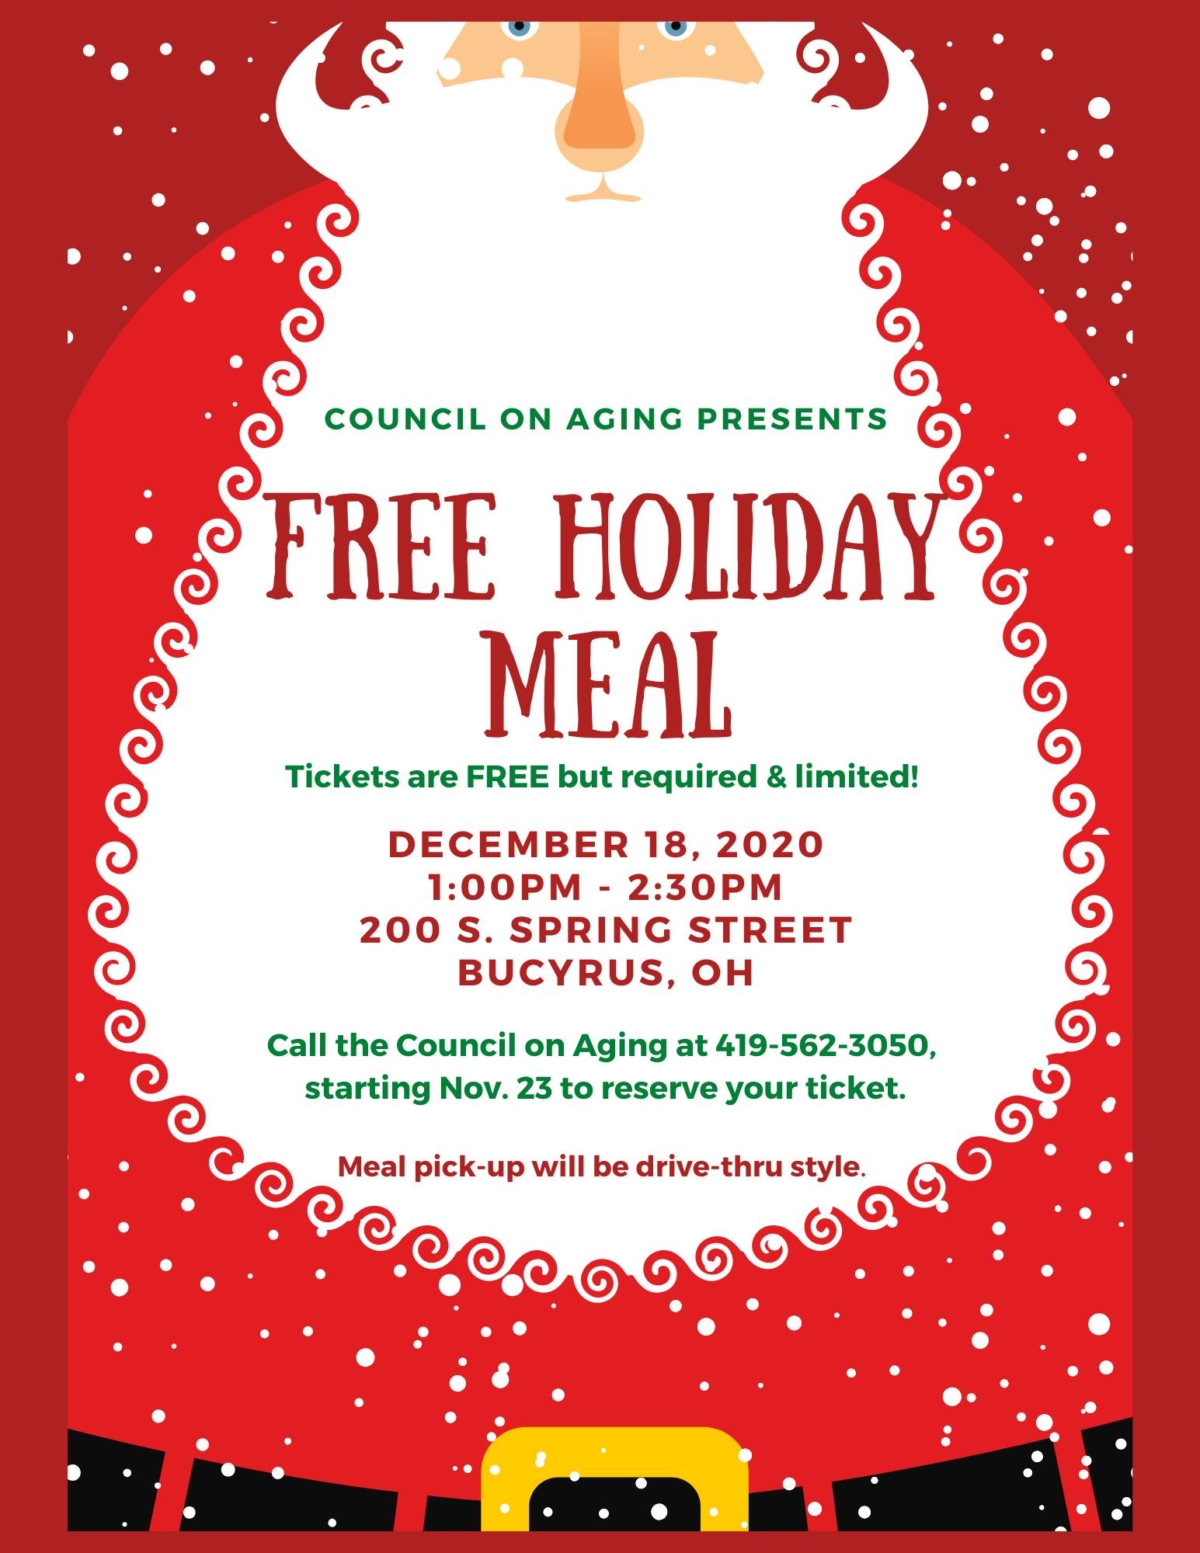 Free Holiday Meal for Seniors at Crawford County Council on Aging